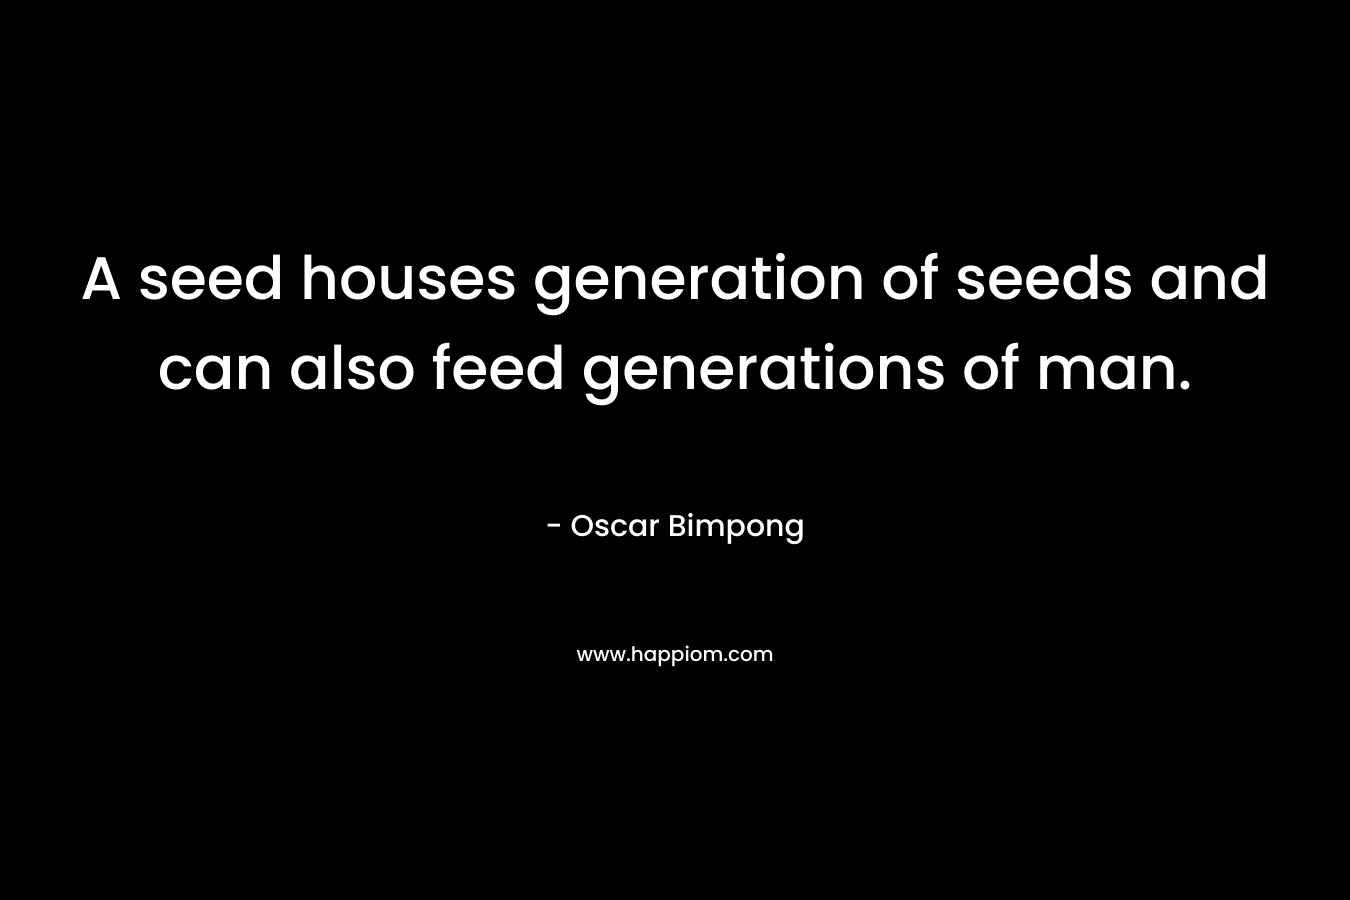 A seed houses generation of seeds and can also feed generations of man. – Oscar Bimpong